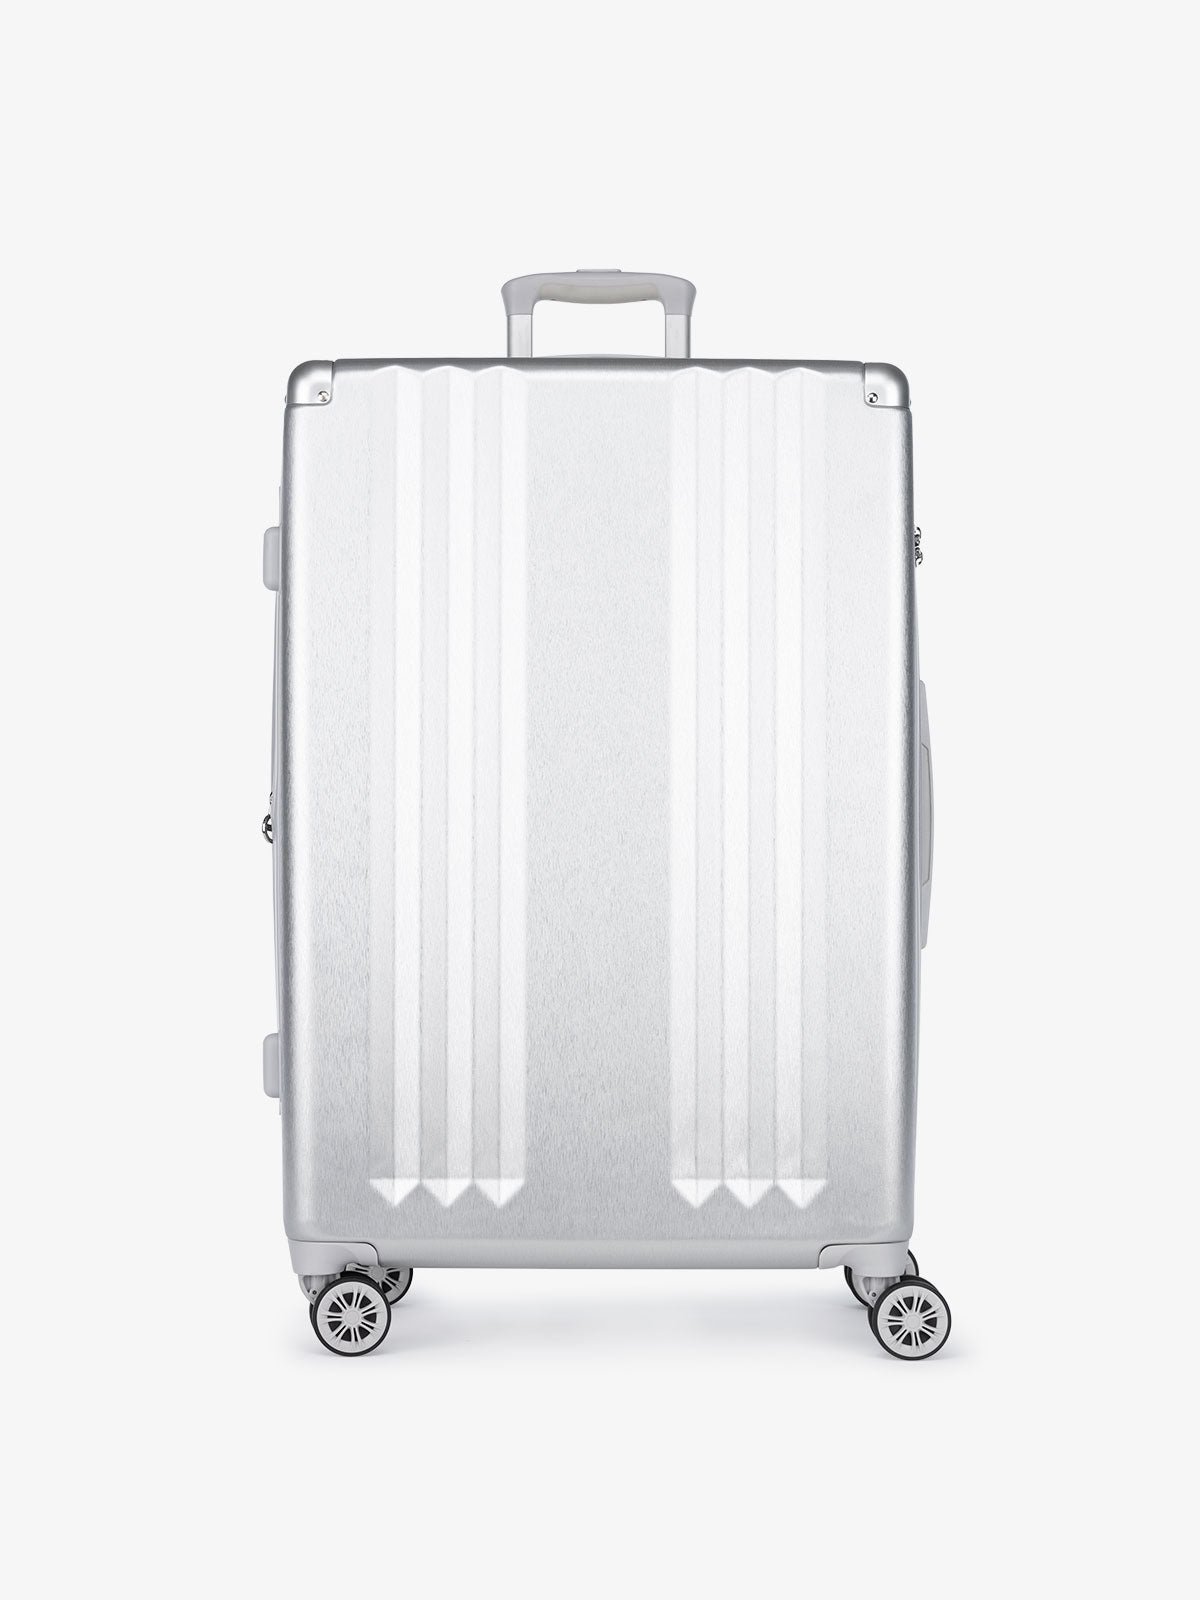 CALPAK Ambeur large silver hard shell suitcase part of 3 piece luggage set